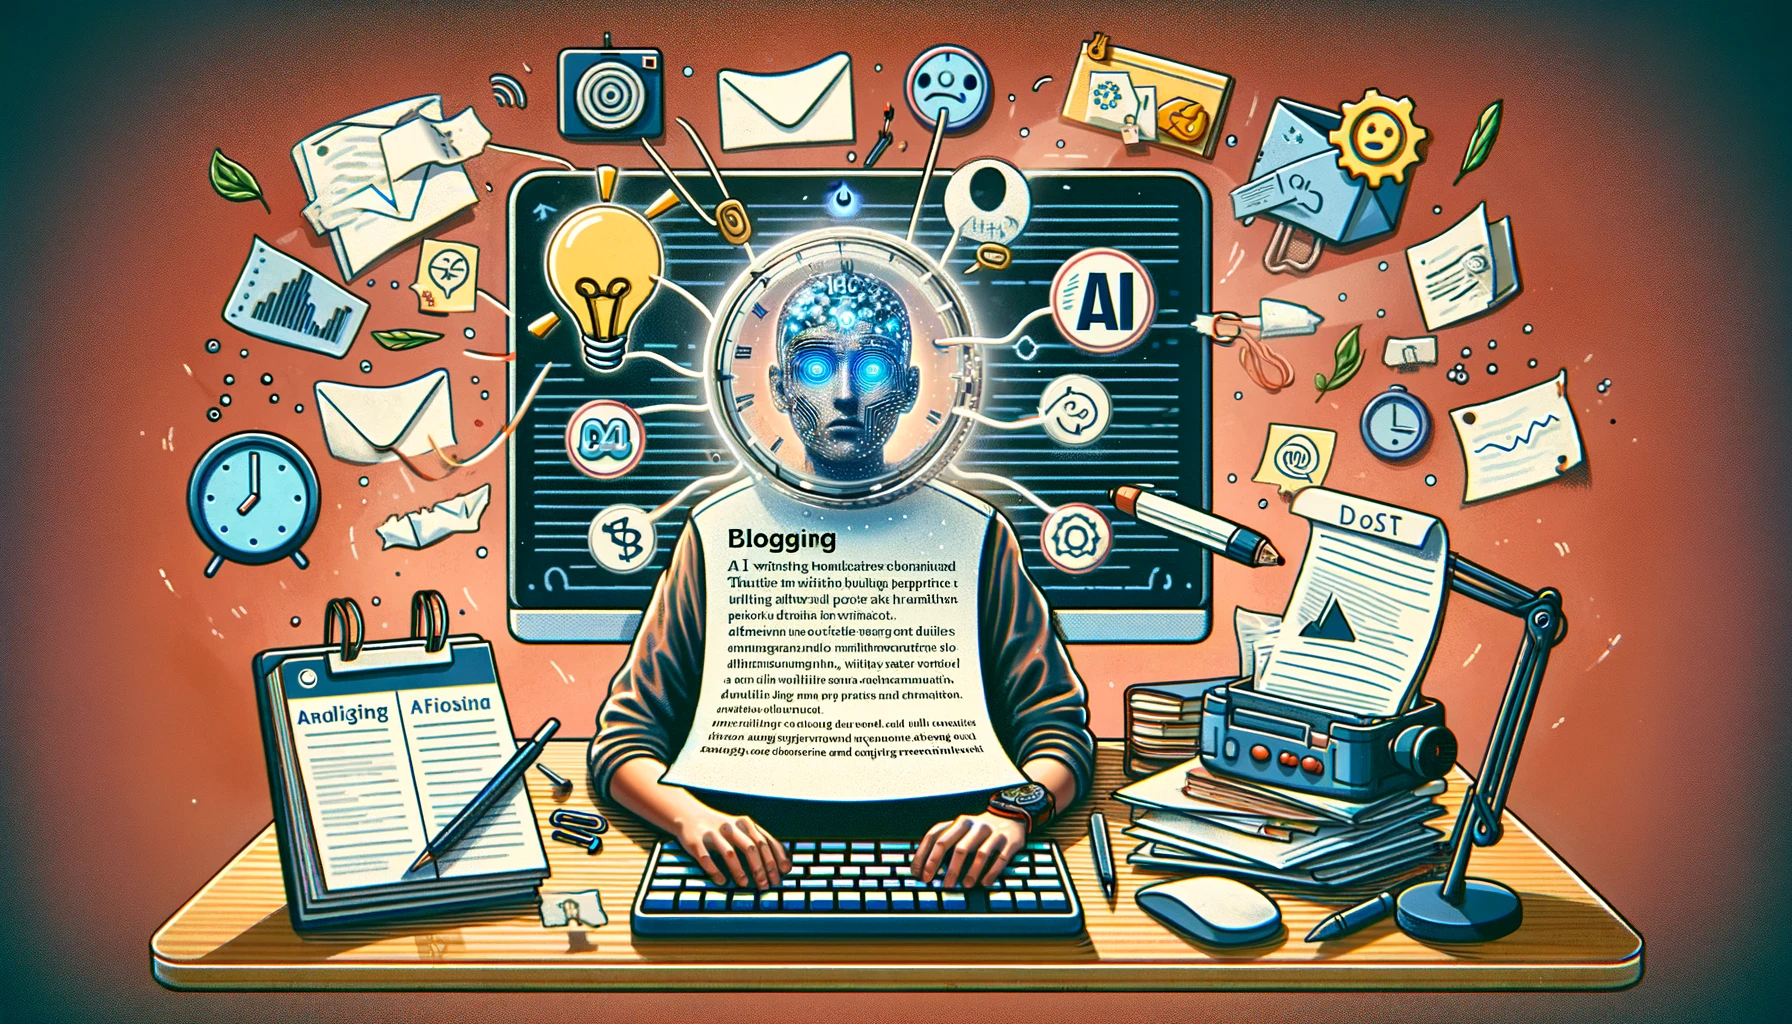 An image depicting the mixed emotions of a blogger using AI to aid in the writing process. The scene should illustrate a person sitting in front of a computer, with visible signs of relief and frustration. The screen should display a draft blog post, with AI technology visibly assisting in the creation process, perhaps through highlighted text or a virtual assistant icon. The blogger's expression should convey a mix of satisfaction and contemplation, reflecting the joy of overcoming writer's block and the challenges of ensuring personal voice within AI-generated content. Elements like scattered notes, a clock showing time pressure, and a light bulb symbolizing ideas should be included to represent the journey from concept to publication, highlighting the balance between human creativity and AI support in modern blogging.